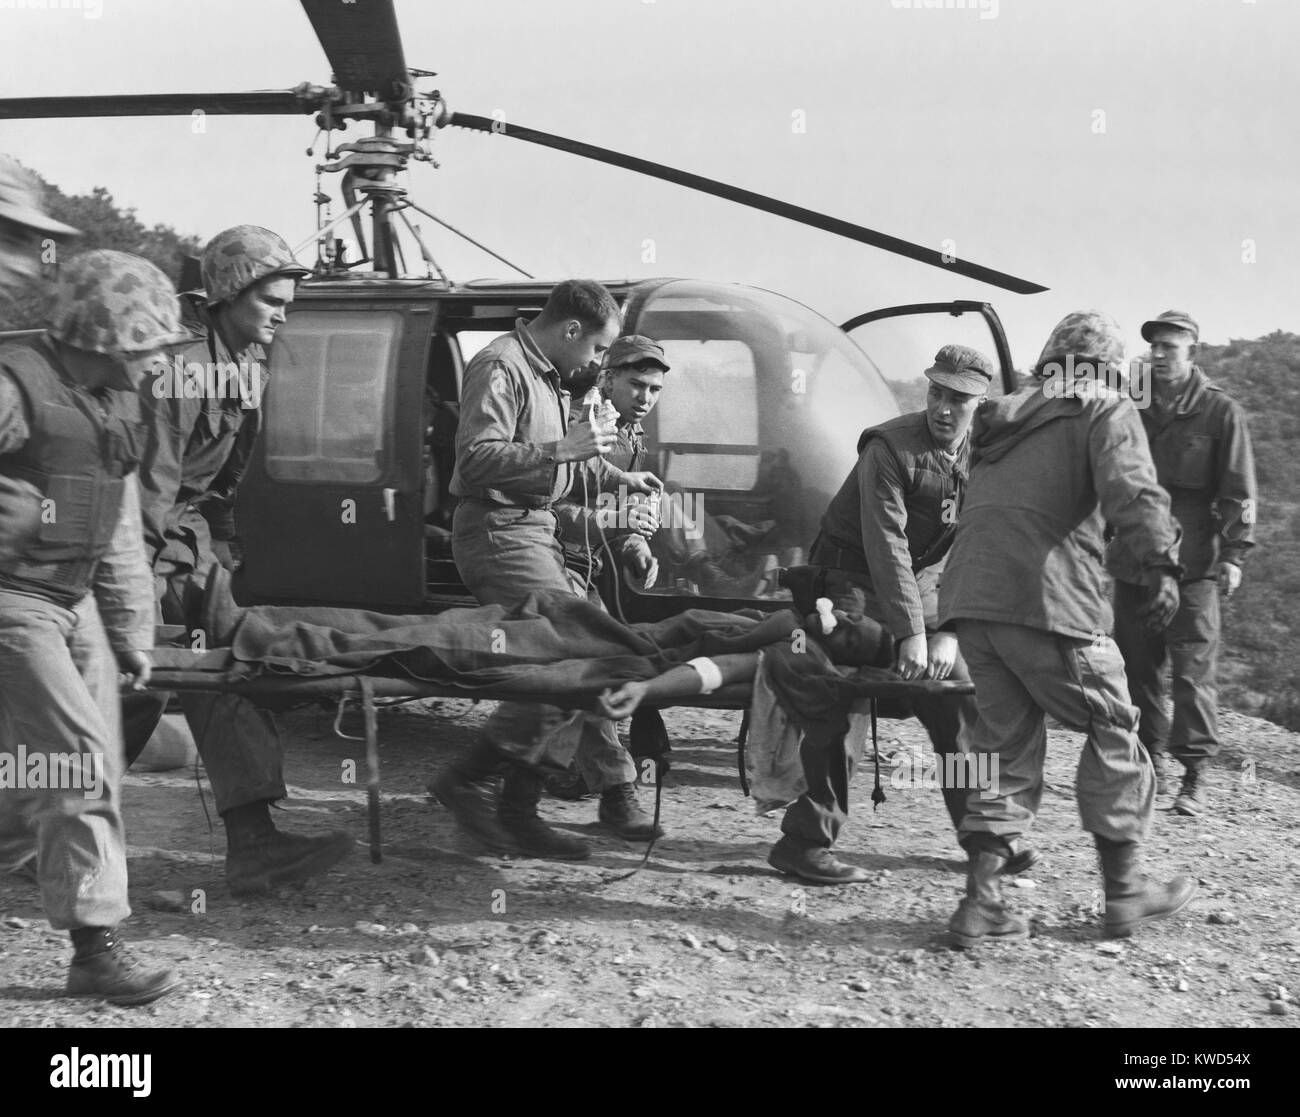 A seriously wounded U.S. Marine is rushed to helicopter by the Corpsmen. He will receive emergency treatment at an aid station located in the Teng-Mak area in Korea. Feb. 25, 1953. Korean War, 1950-53. (BSLOC 2014 11 192) Stock Photo